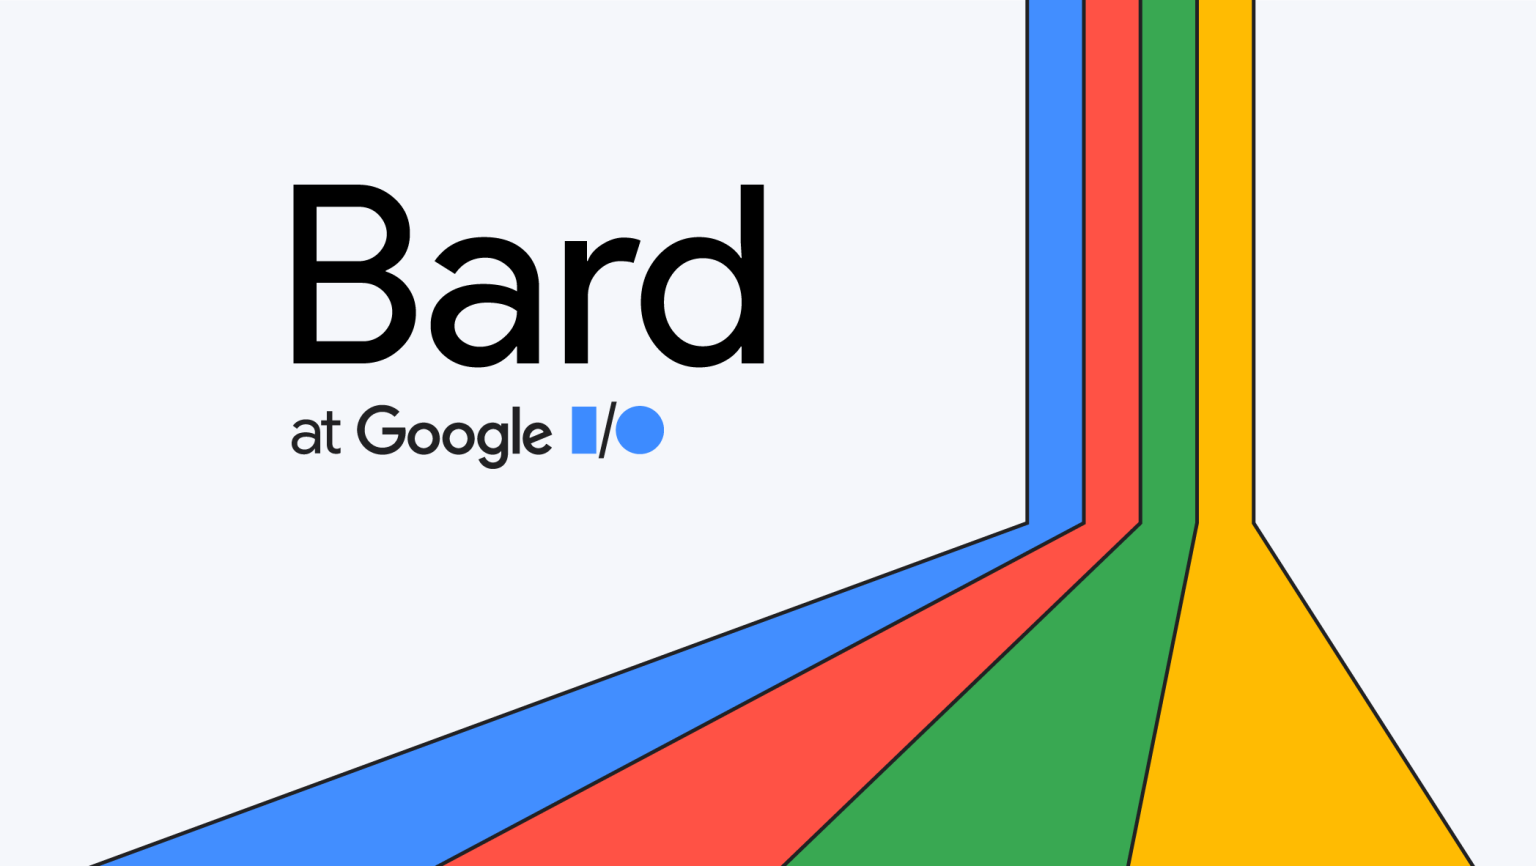 Google Bard Now Supports Precise Location Functionality